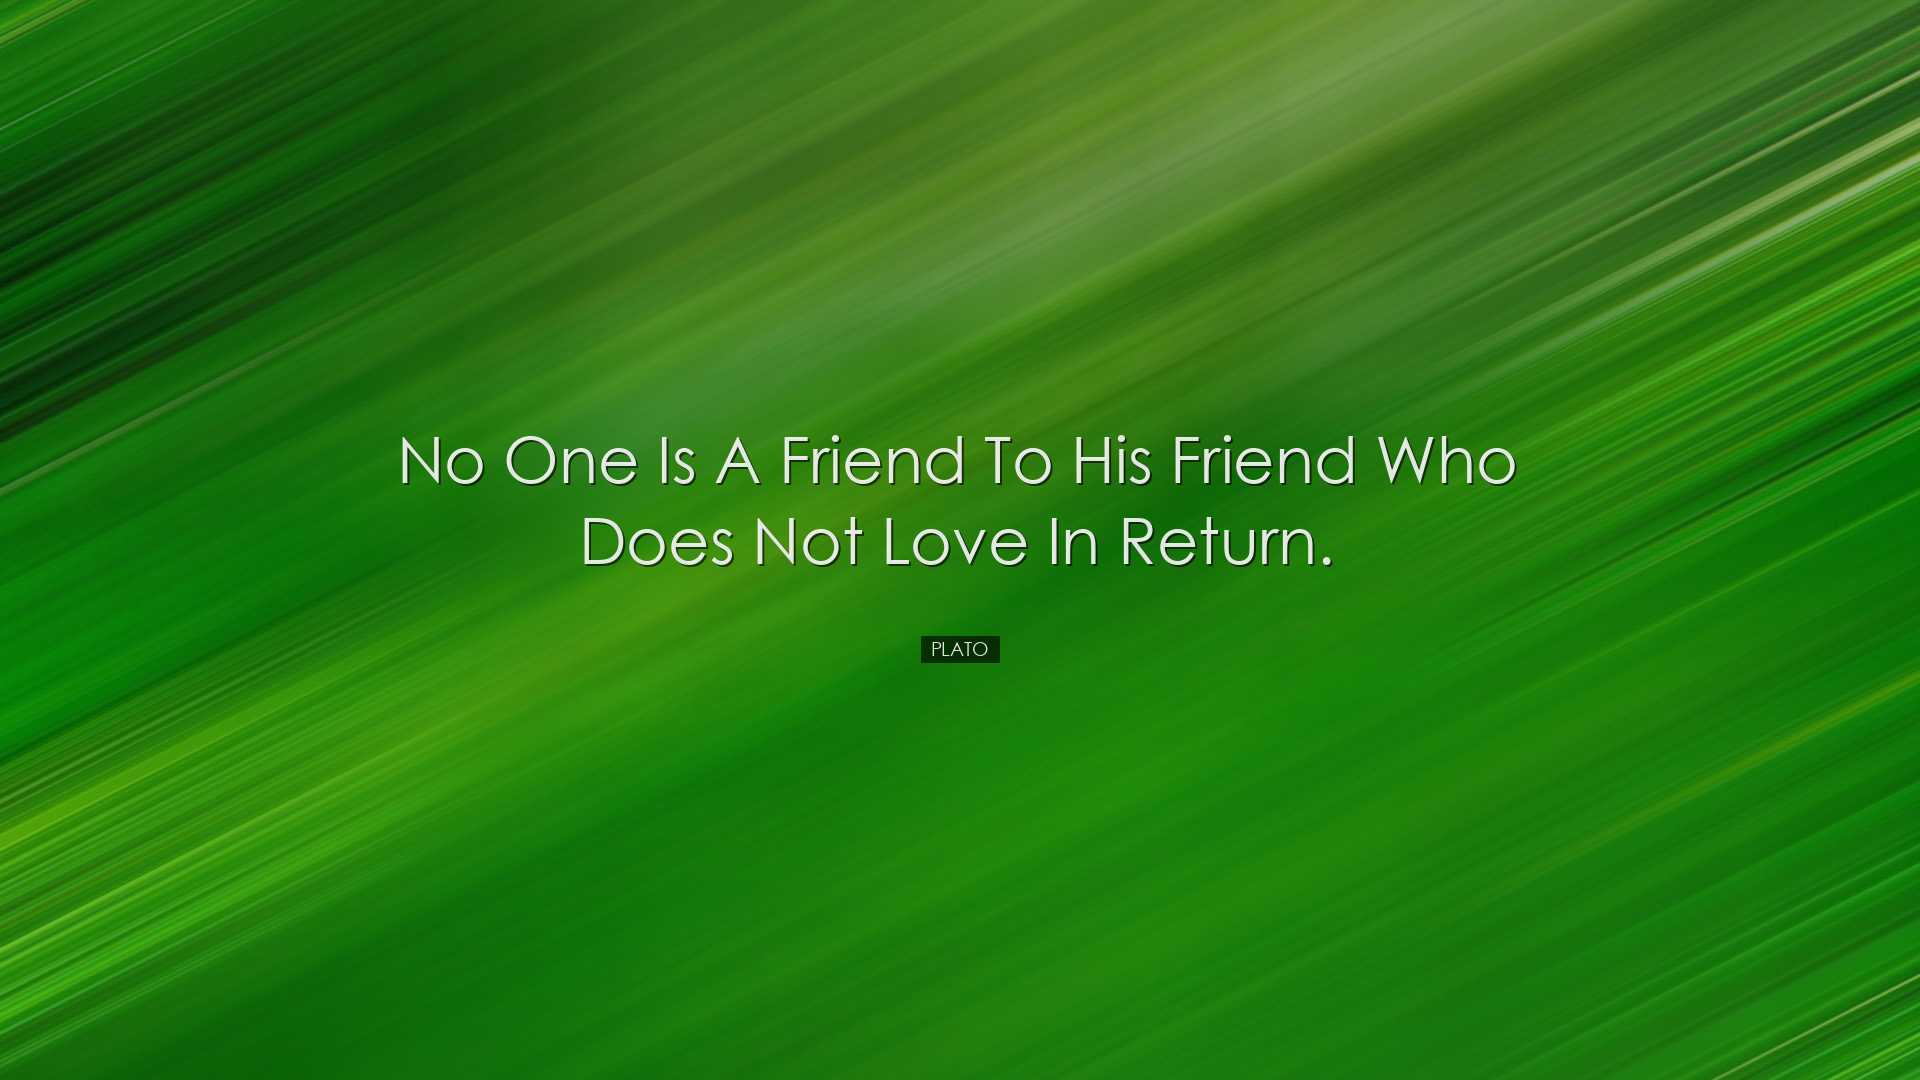 No one is a friend to his friend who does not love in return. - Pl